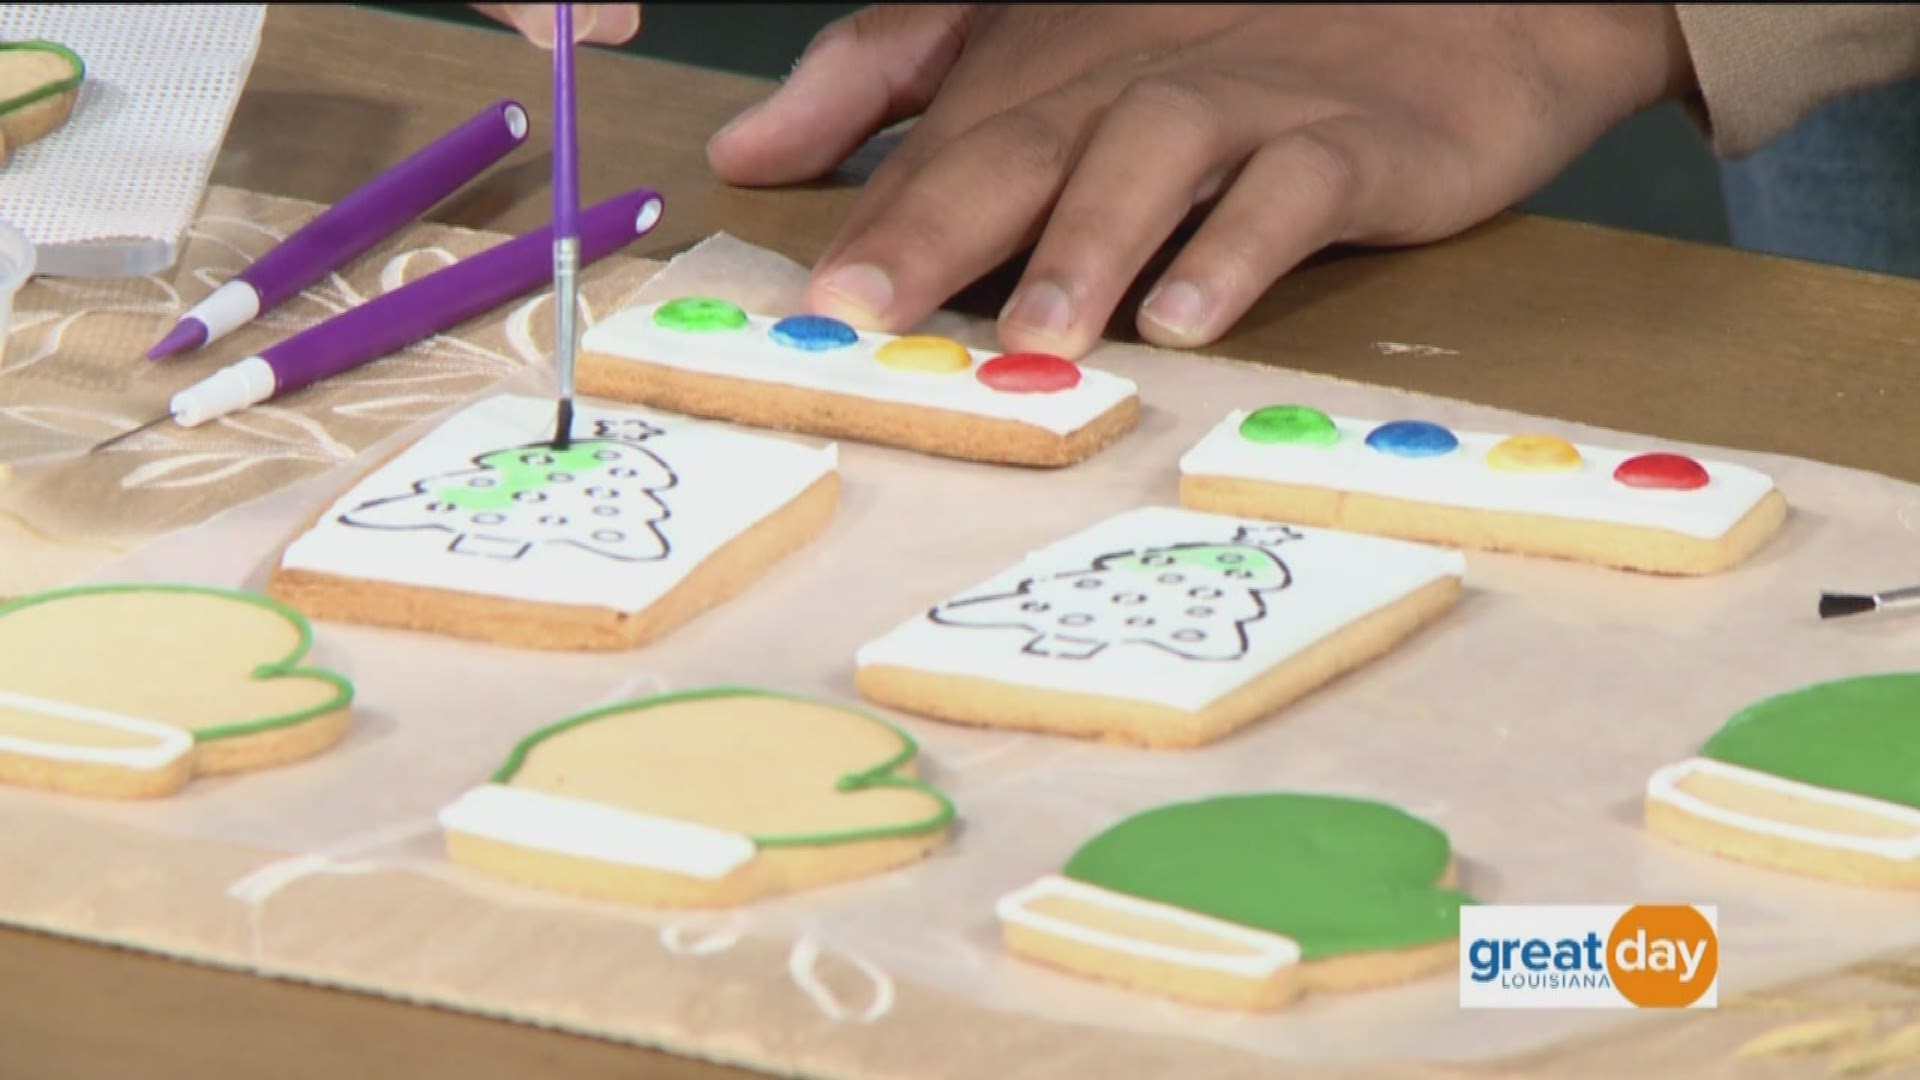 Carol Pfister and Holly Conforte with Old Metairie Cookie Jar shows you easy ways to decorate holiday cookies.